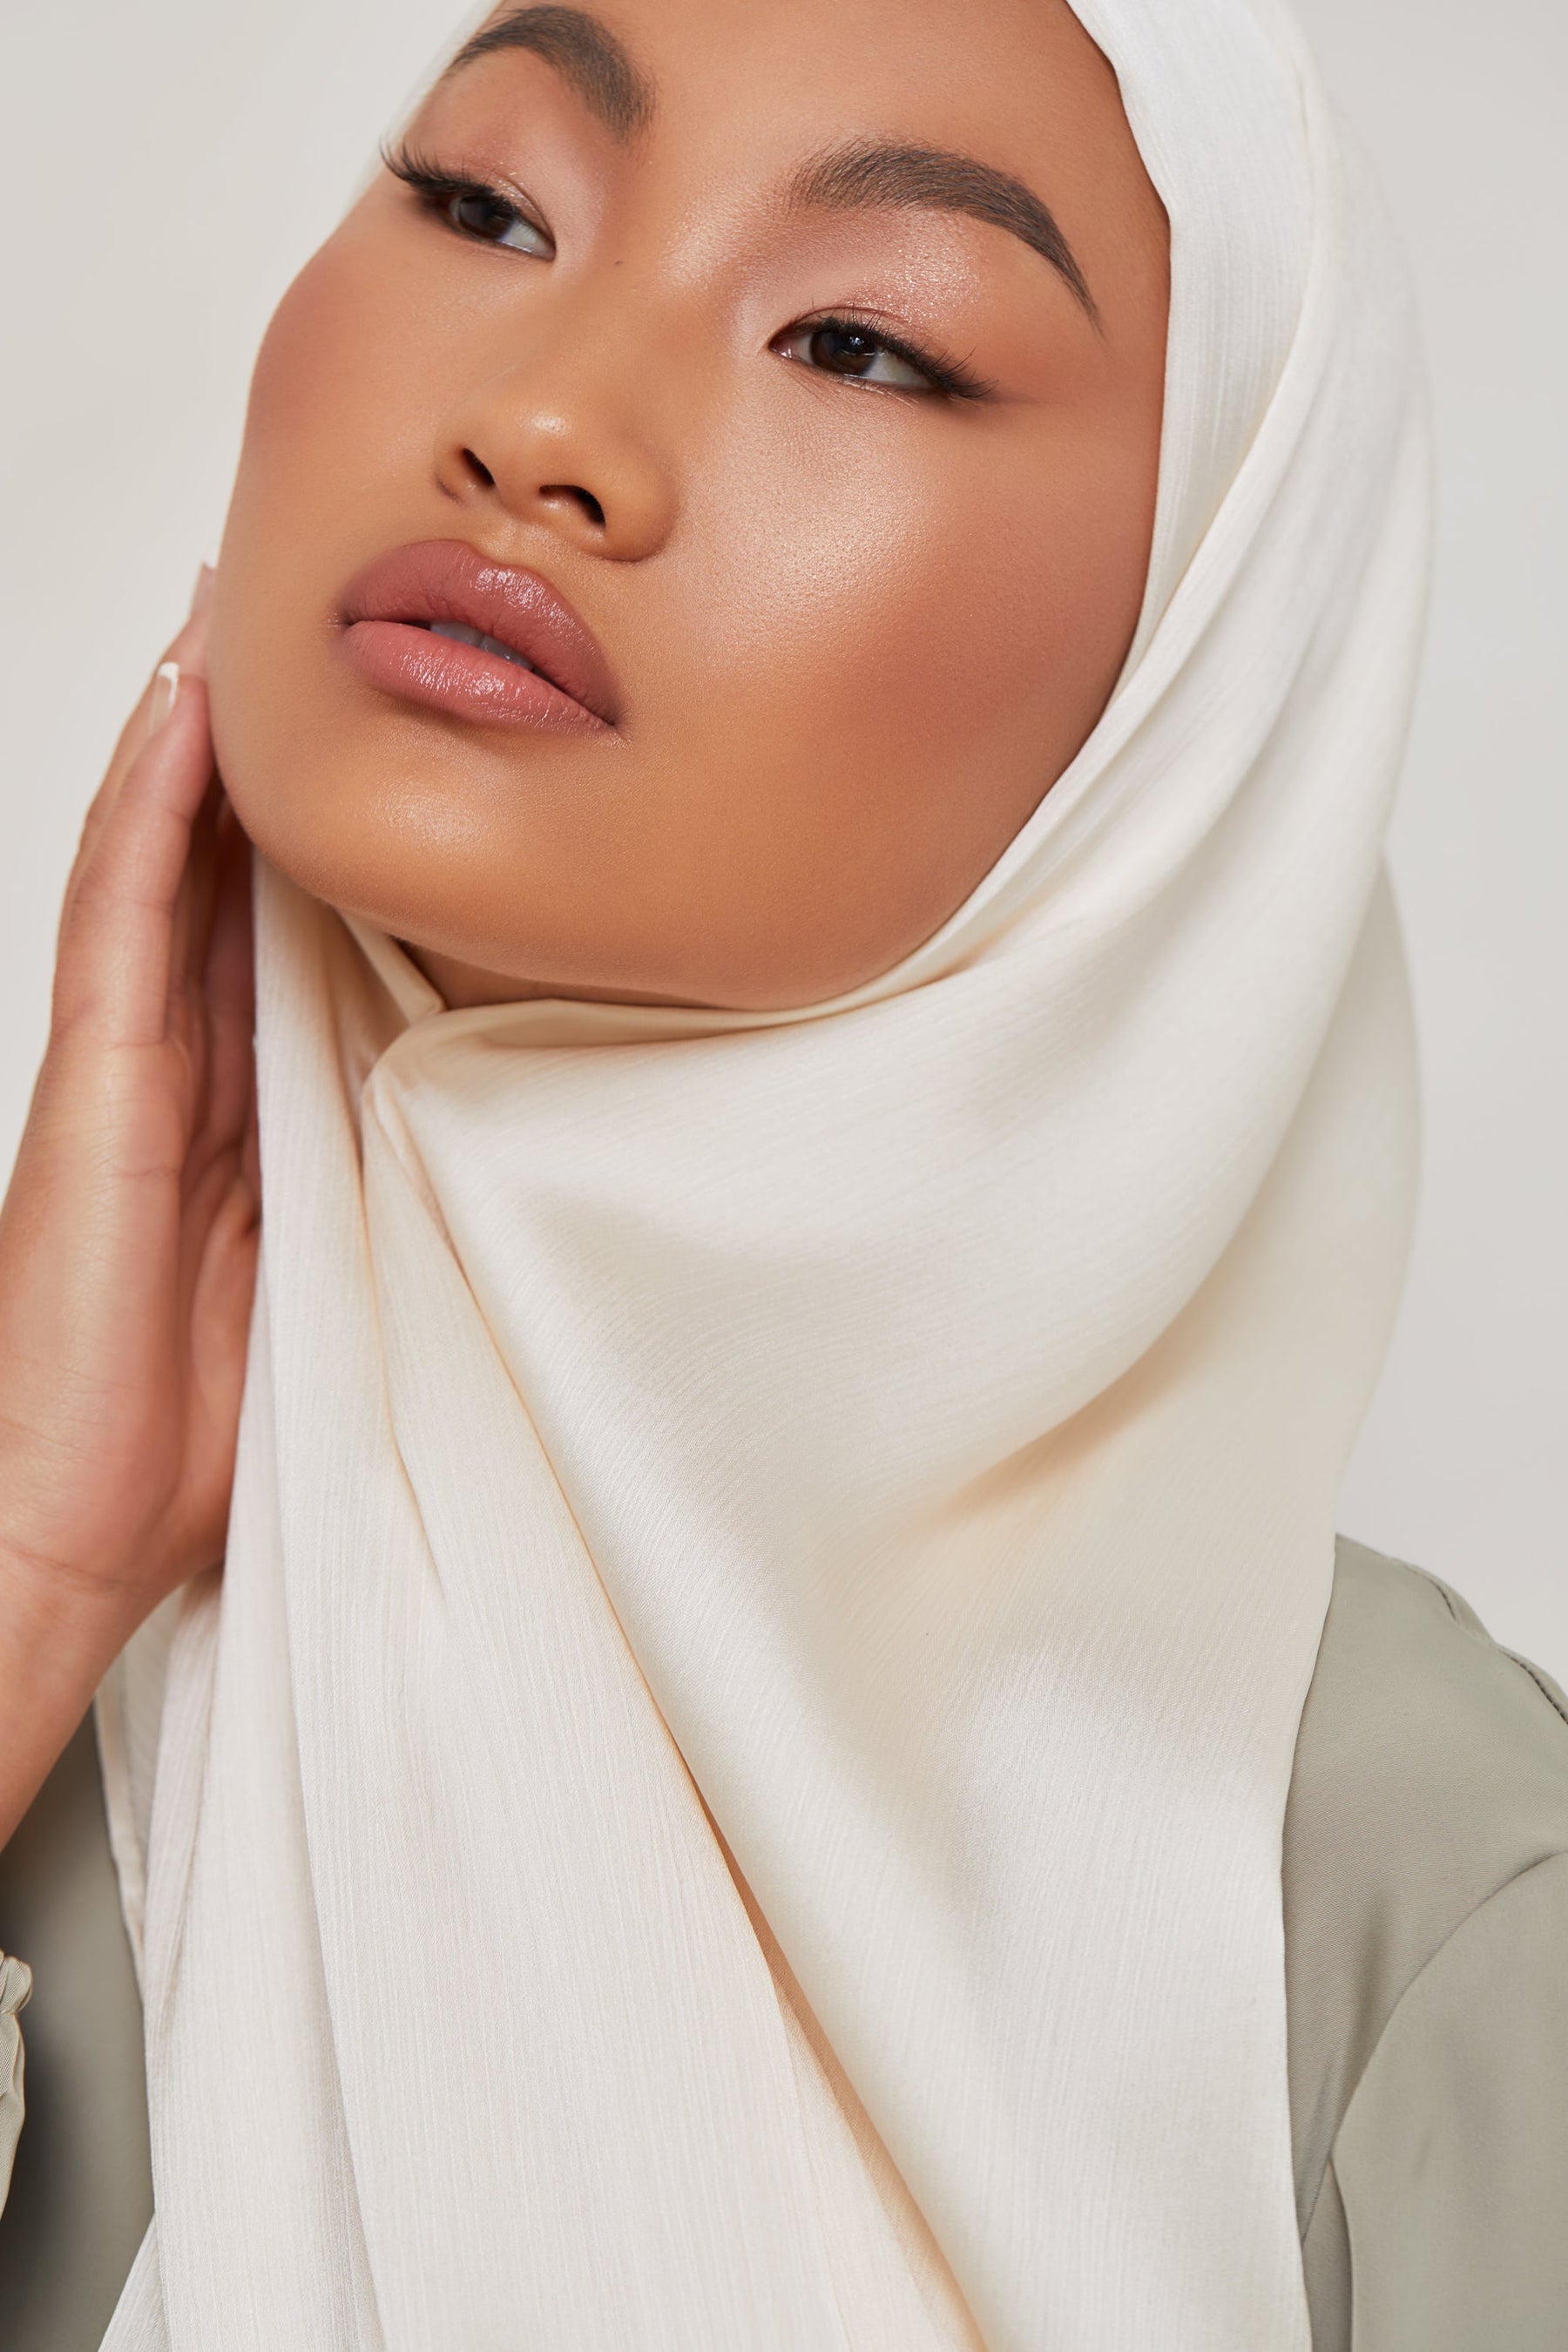 TEXTURE Satin Crepe Hijab - Ivory Crepe Veiled Collection 